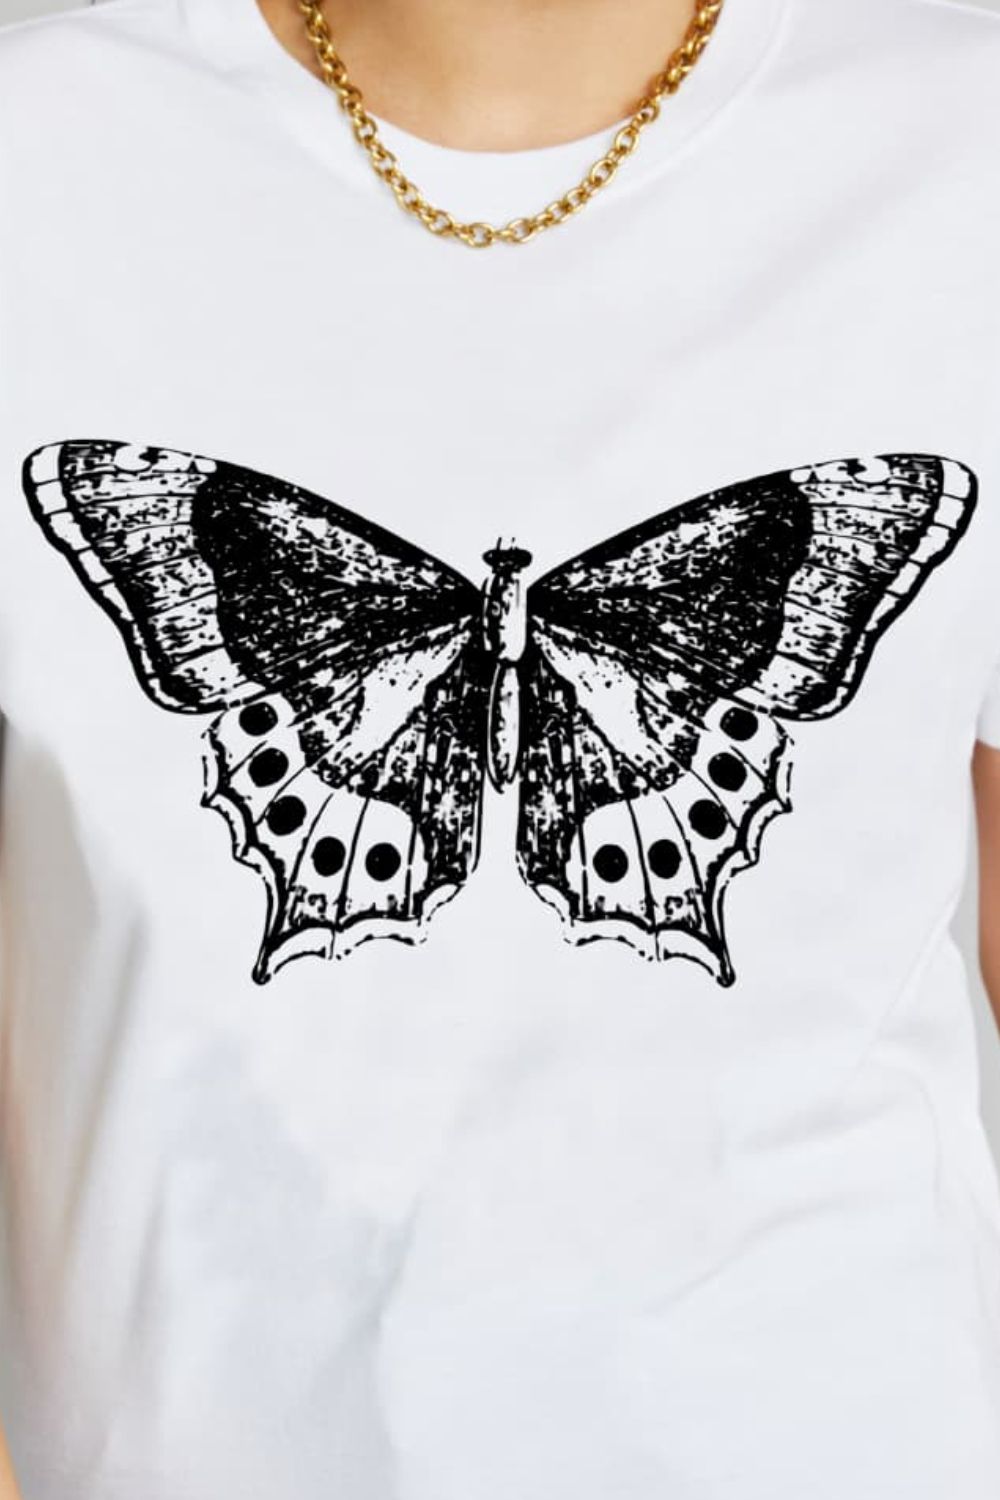 Lavender Simply Love Full Size Butterfly Graphic Cotton T-Shirt Sentient Beauty Fashions tees